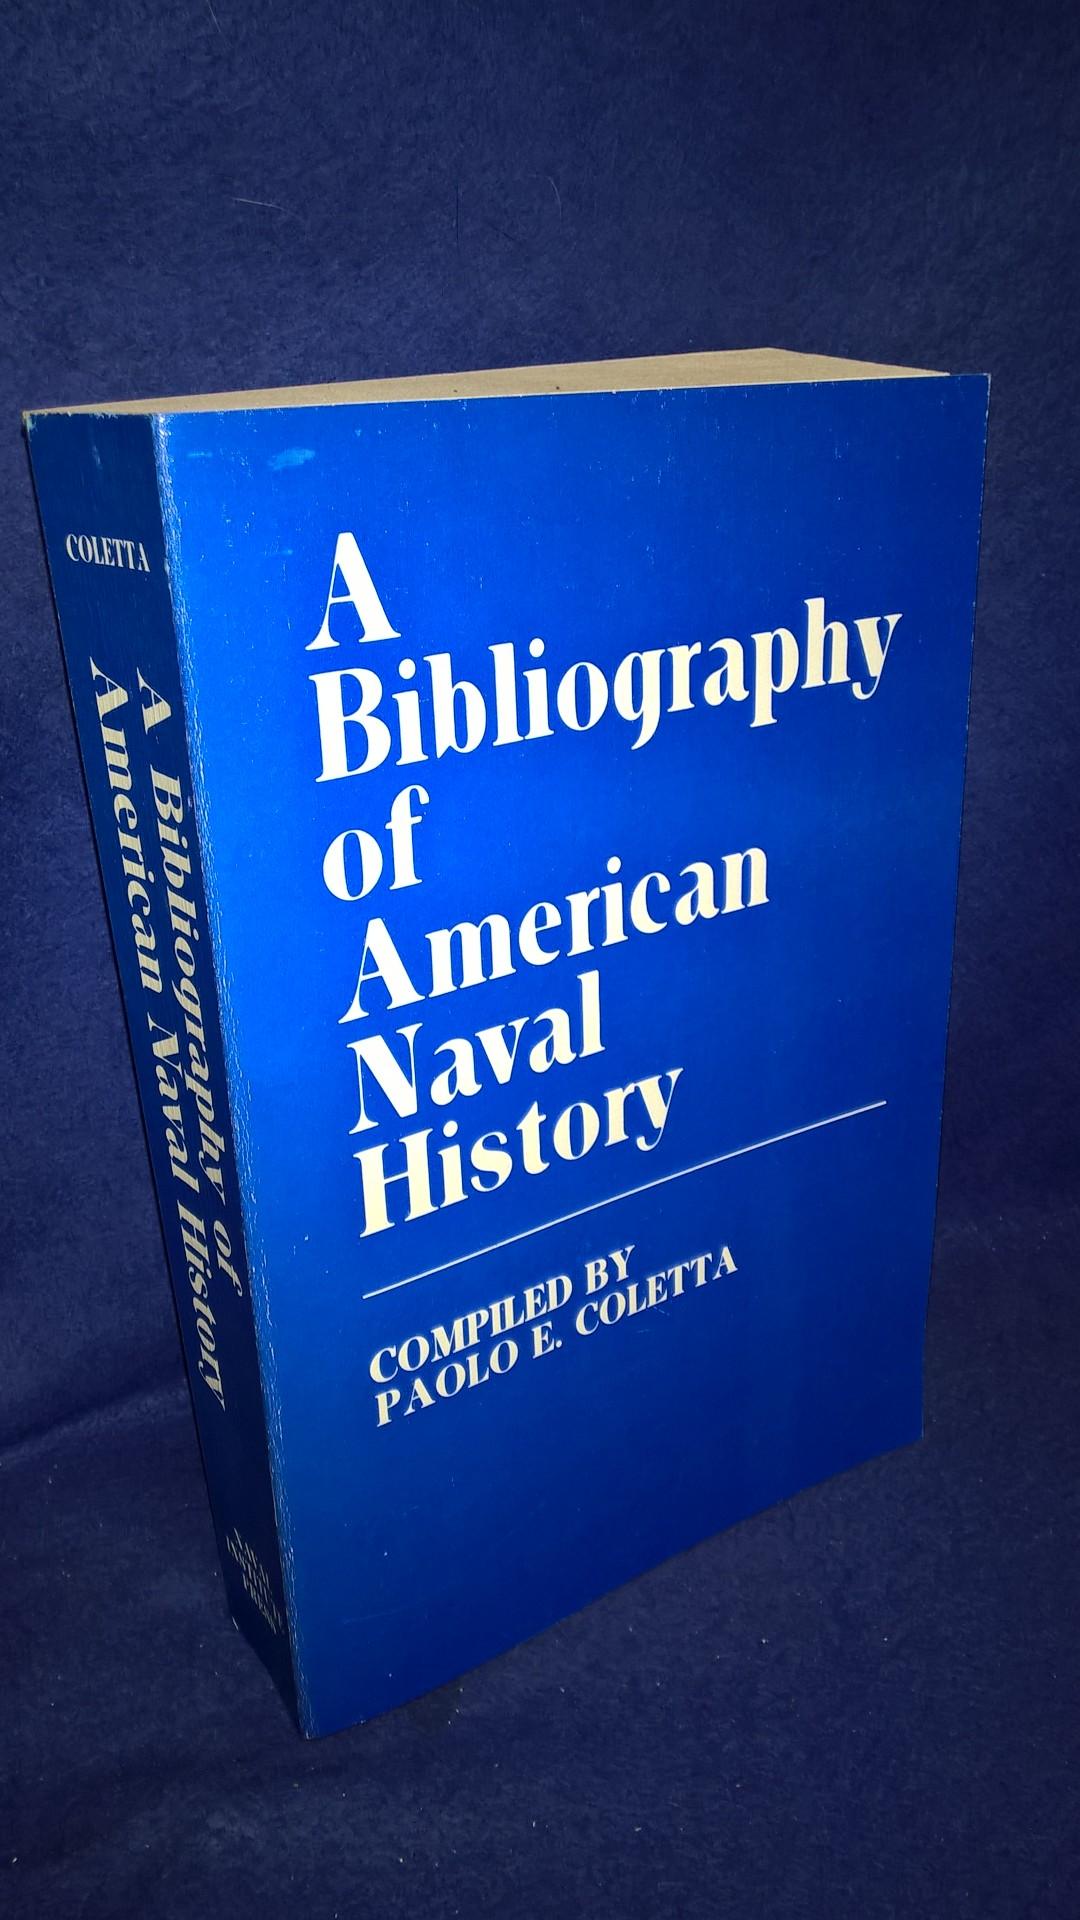 A Bibliography of American Naval History.